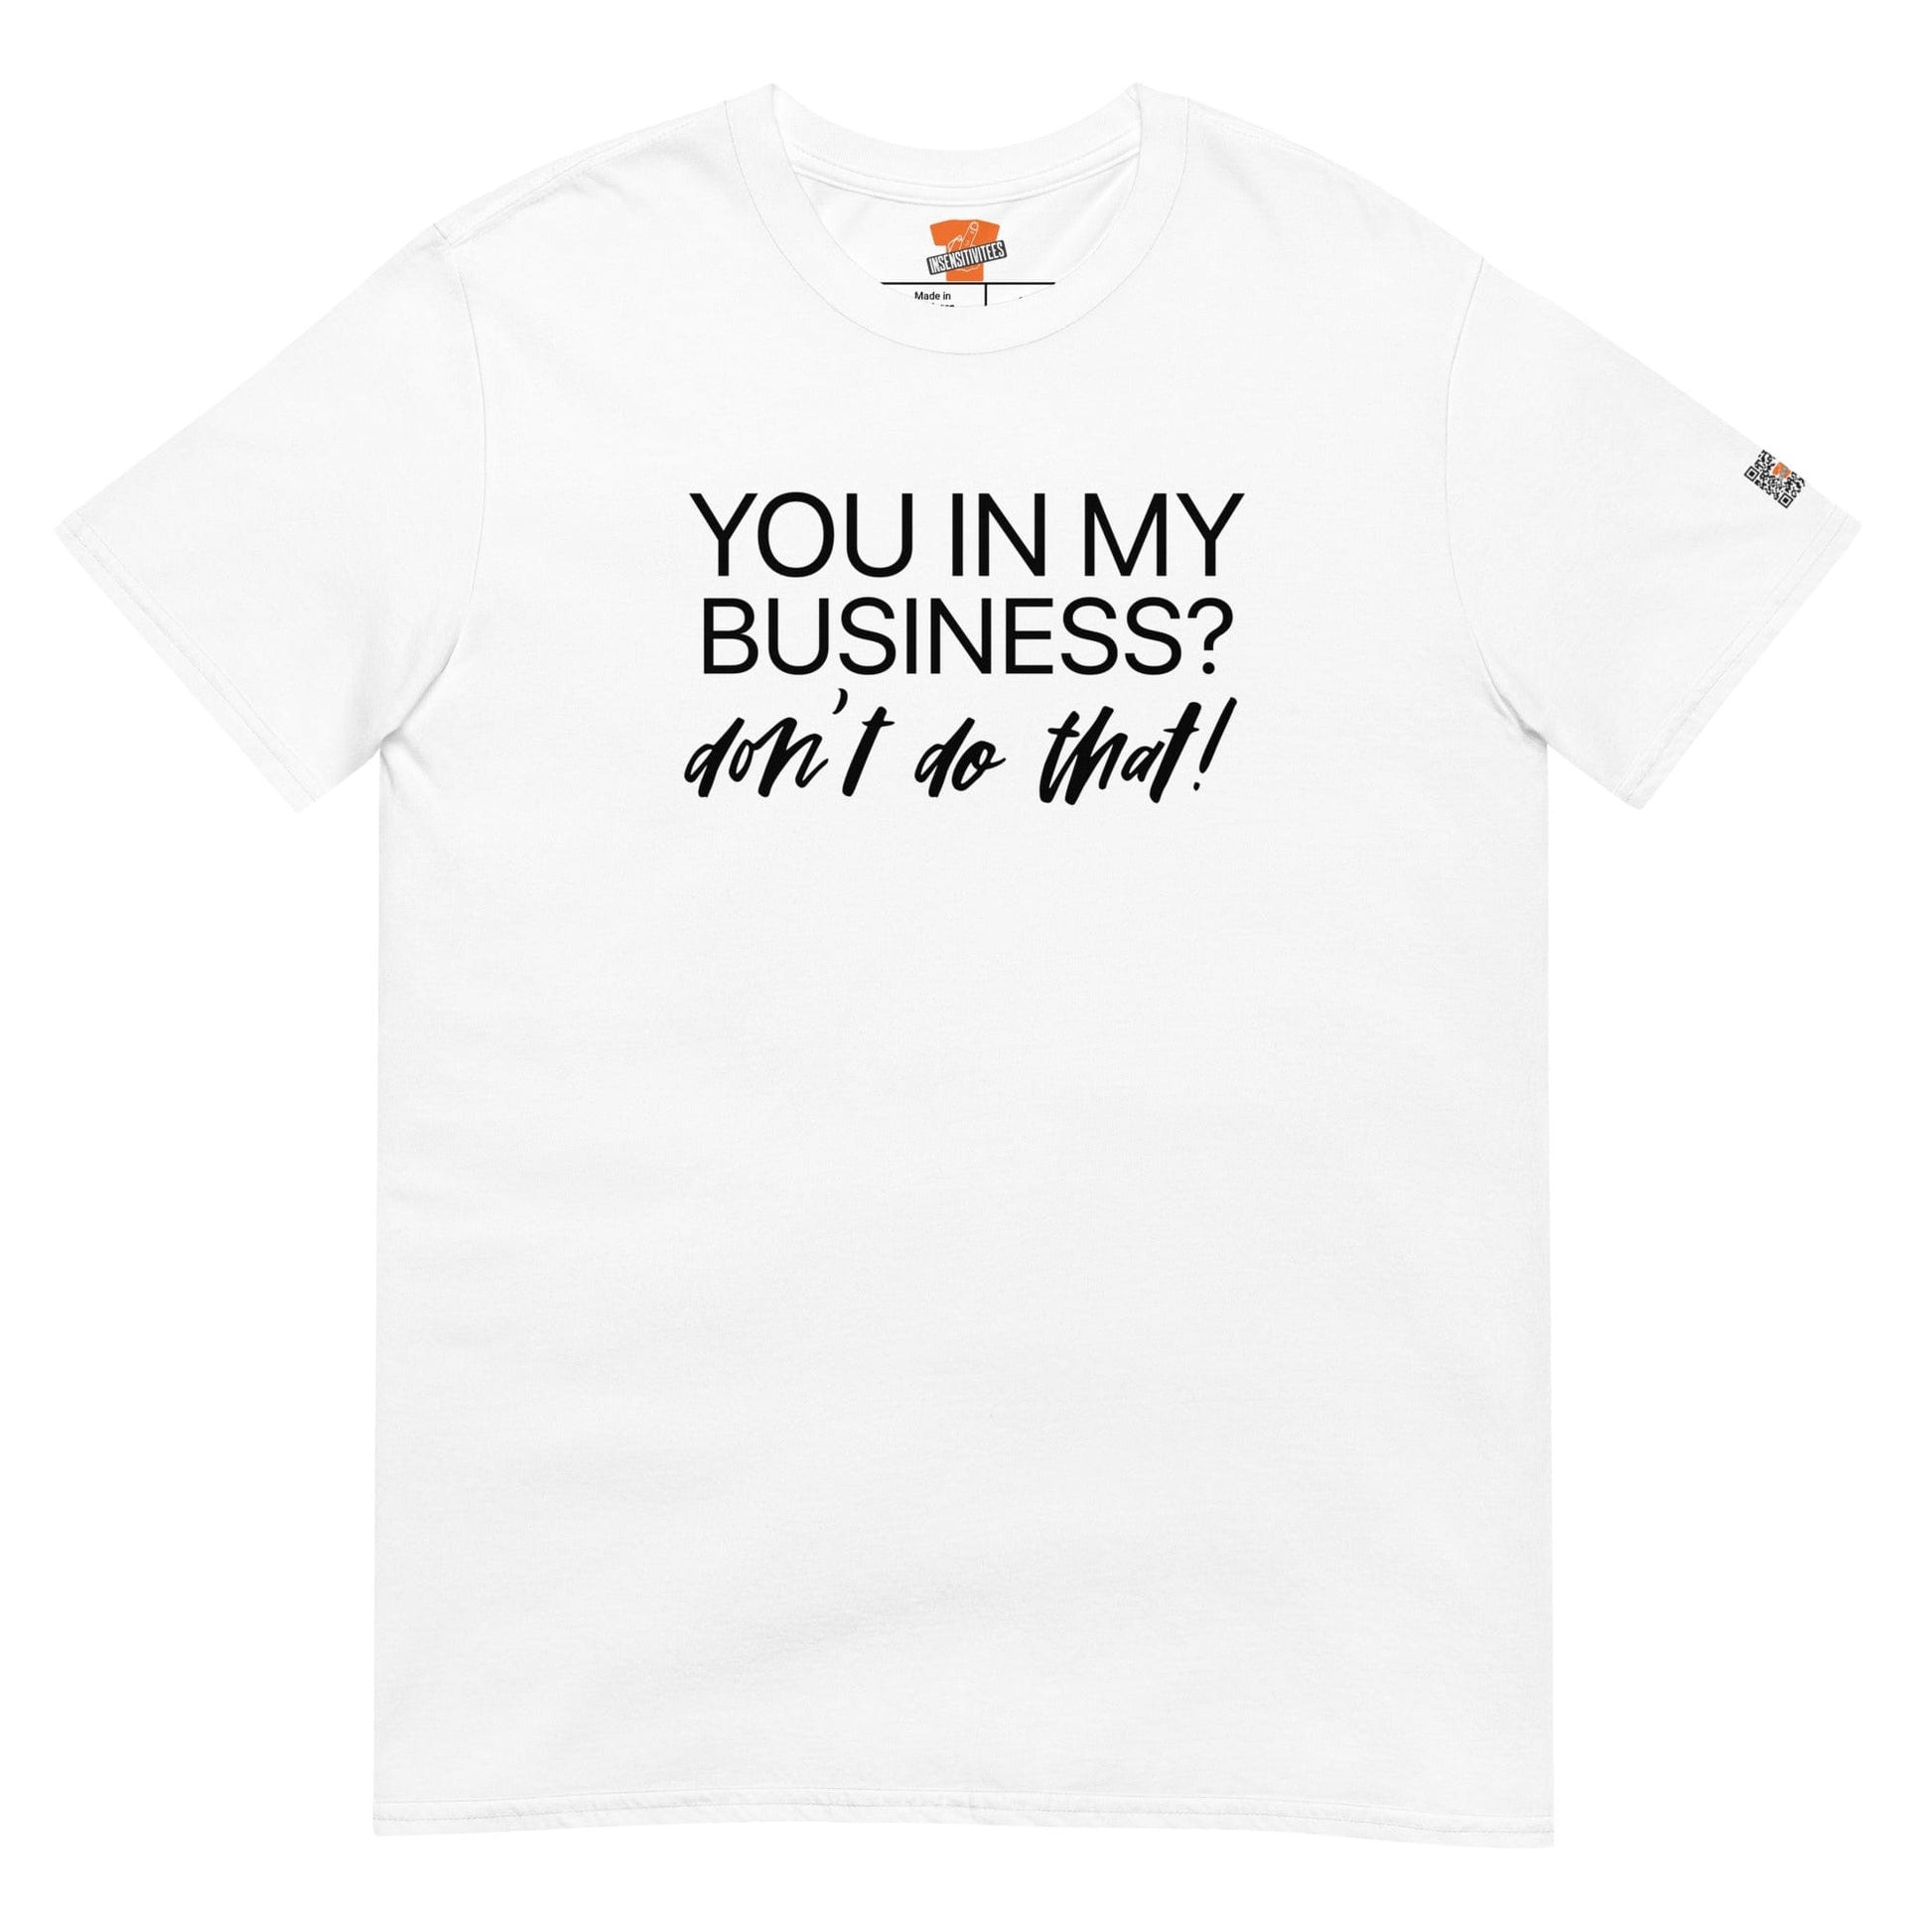 InsensitiviTees™️ White You In My Business? Unisex T-Shirt